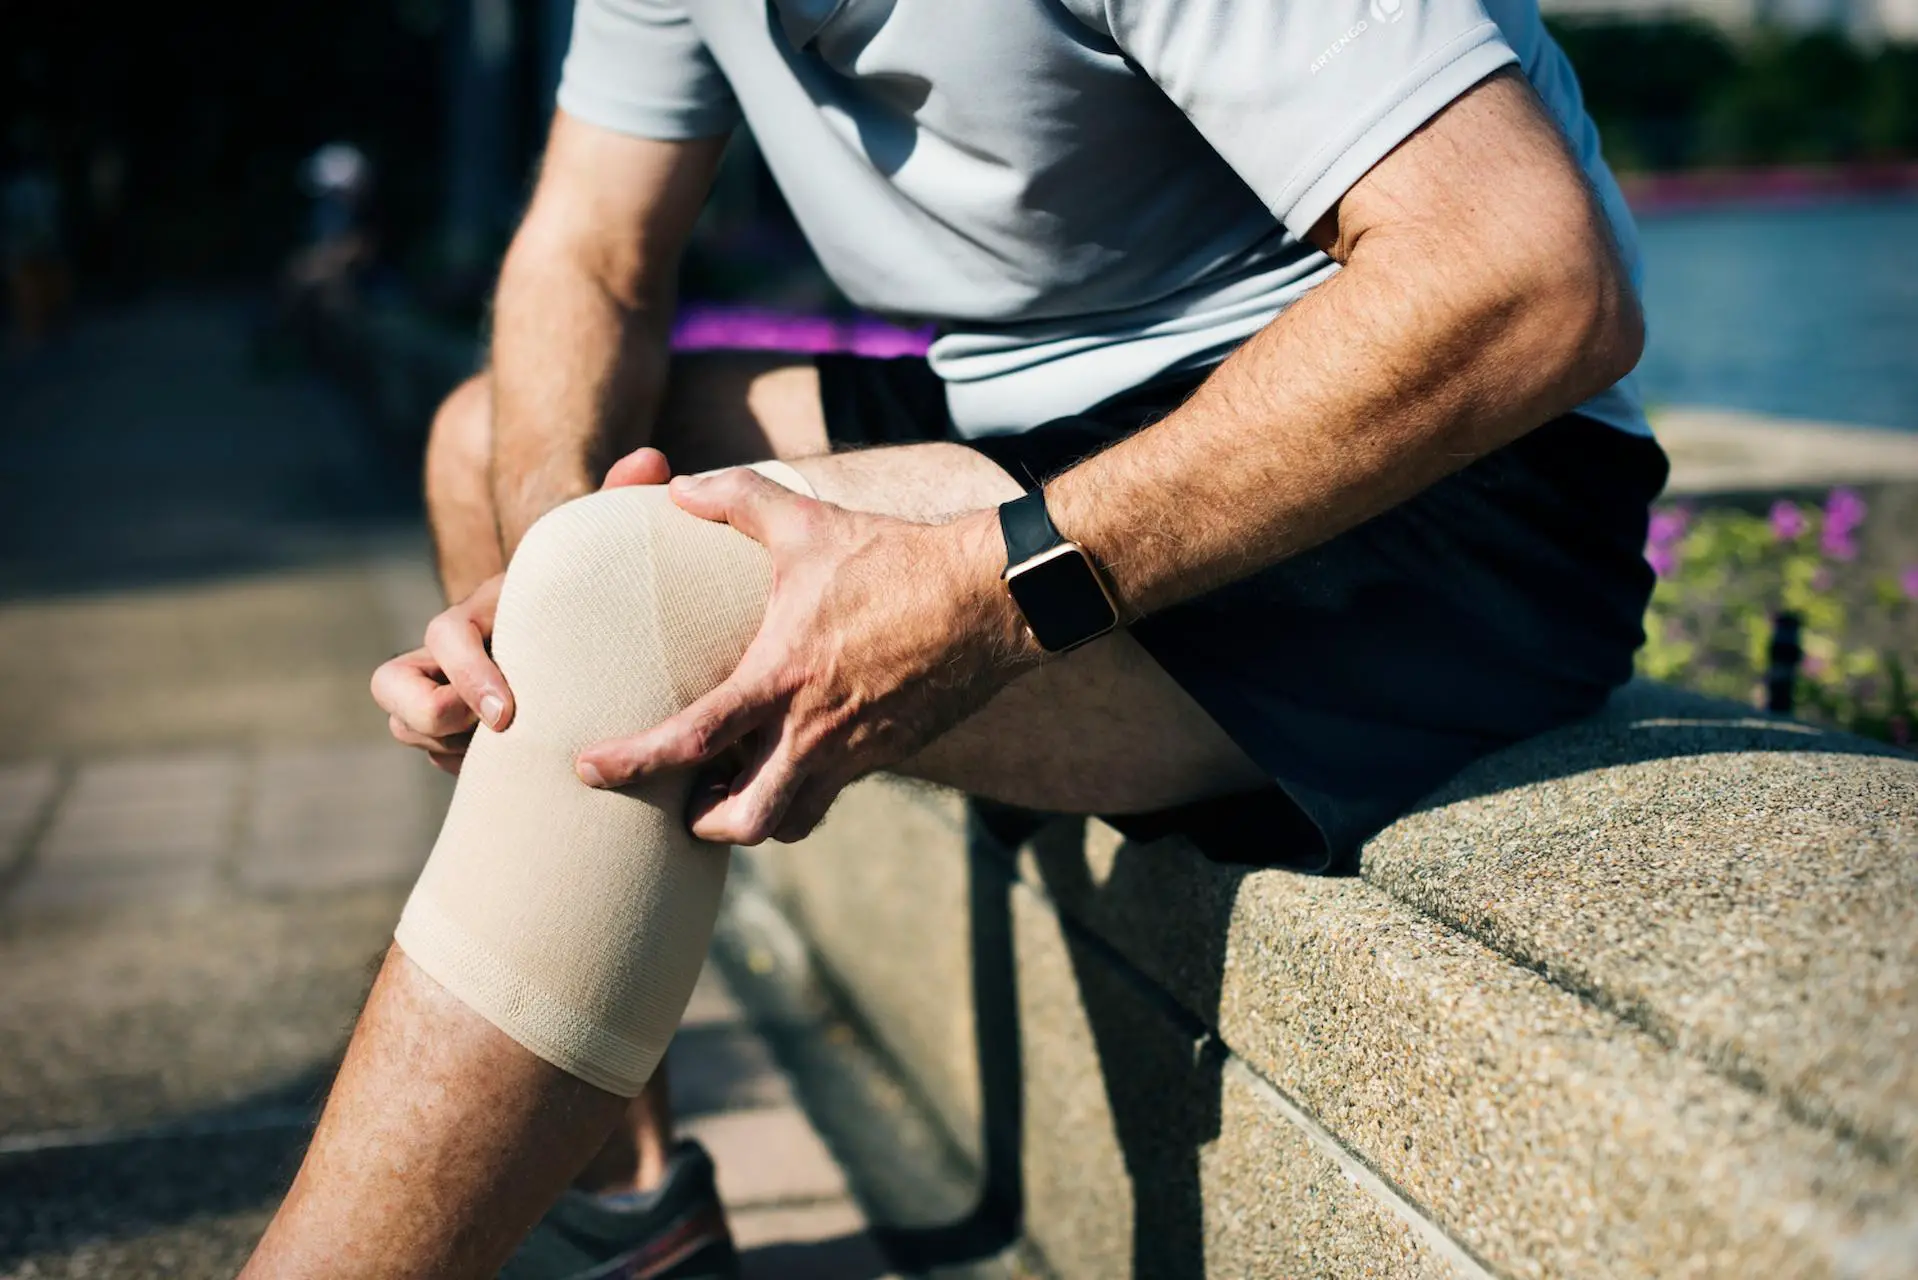 What Are The Most Common Sports Injuries?